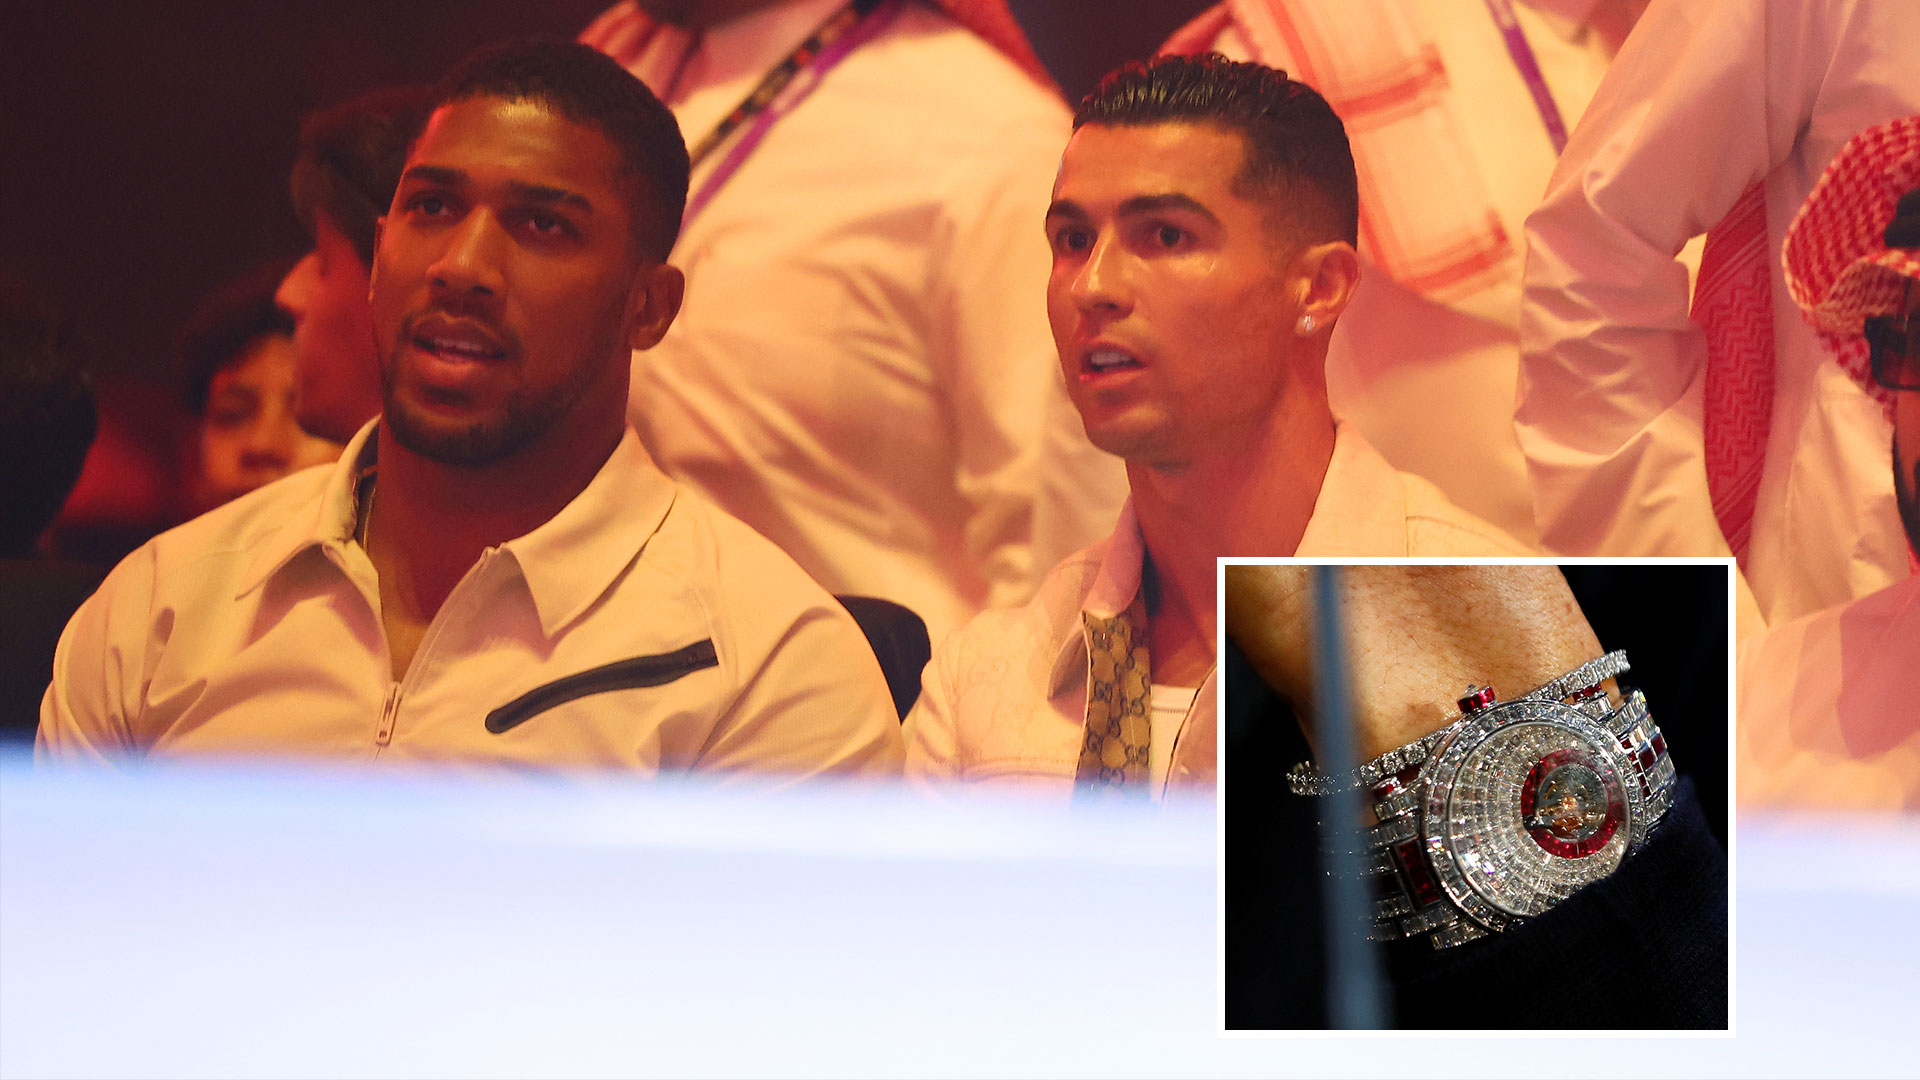 Cristiano Ronaldo wears astonishing 1.2m watch and 3,350 Gucci outfit as he sits with Anthony Joshua for Fury vs Usyk [Video]